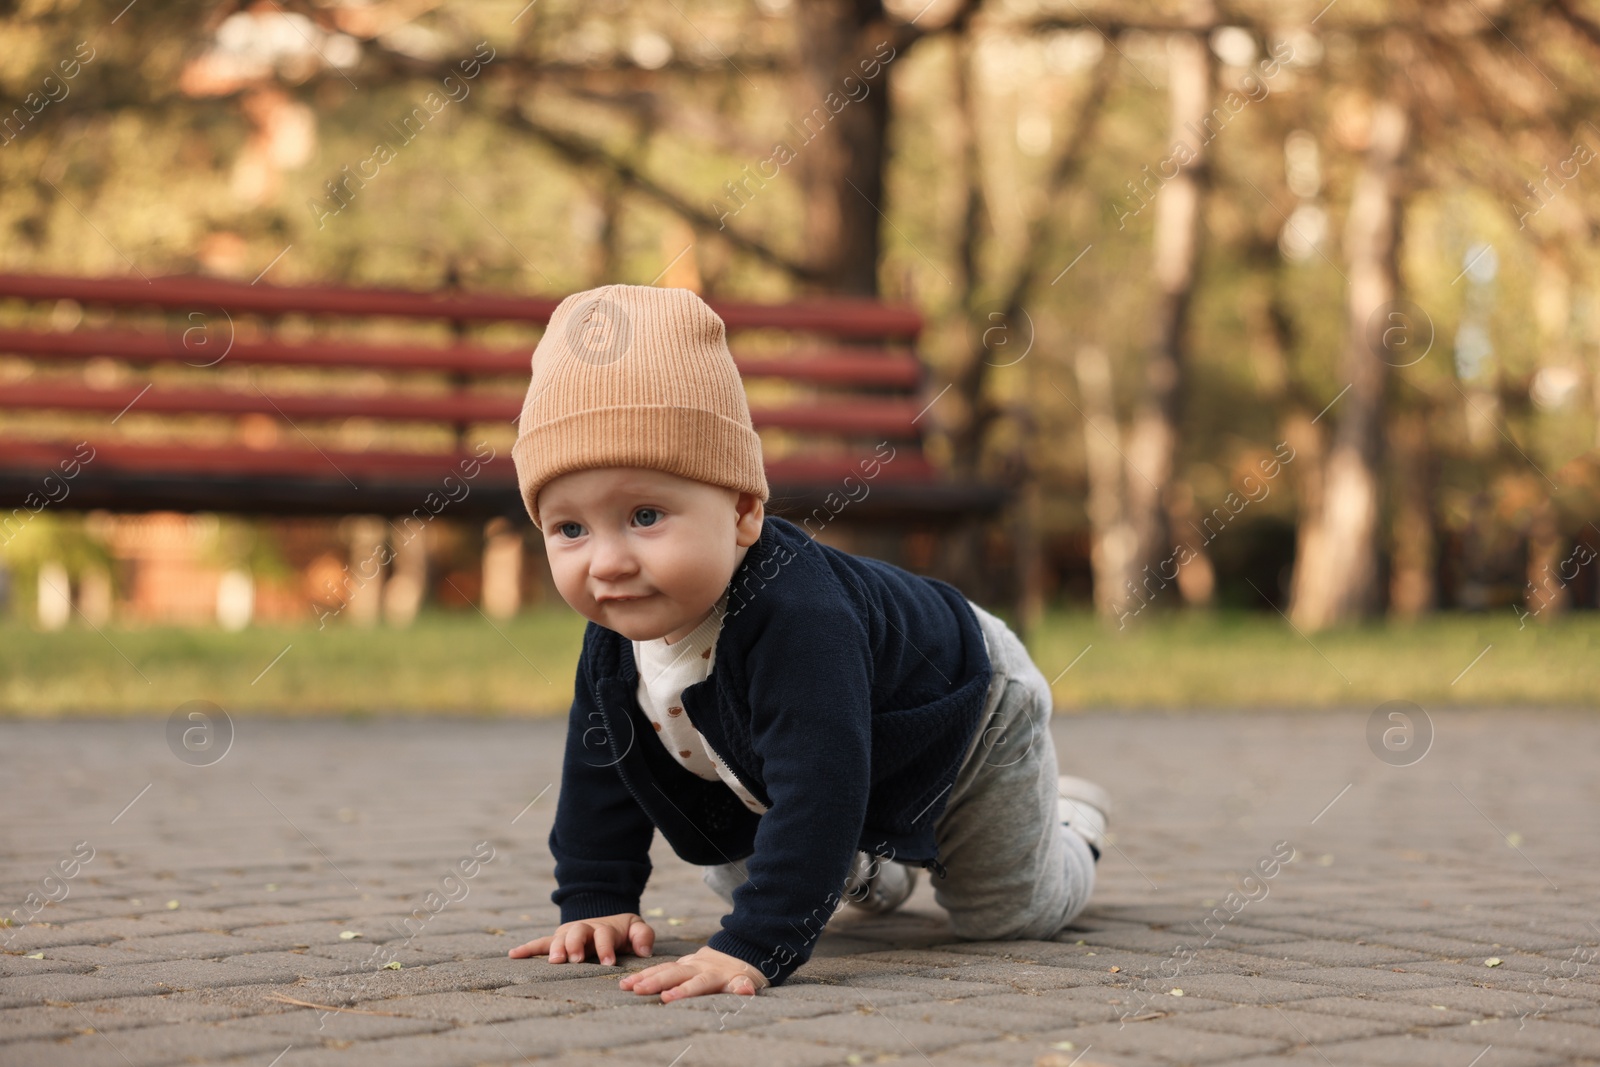 Photo of Learning to walk. Little baby crawling in park